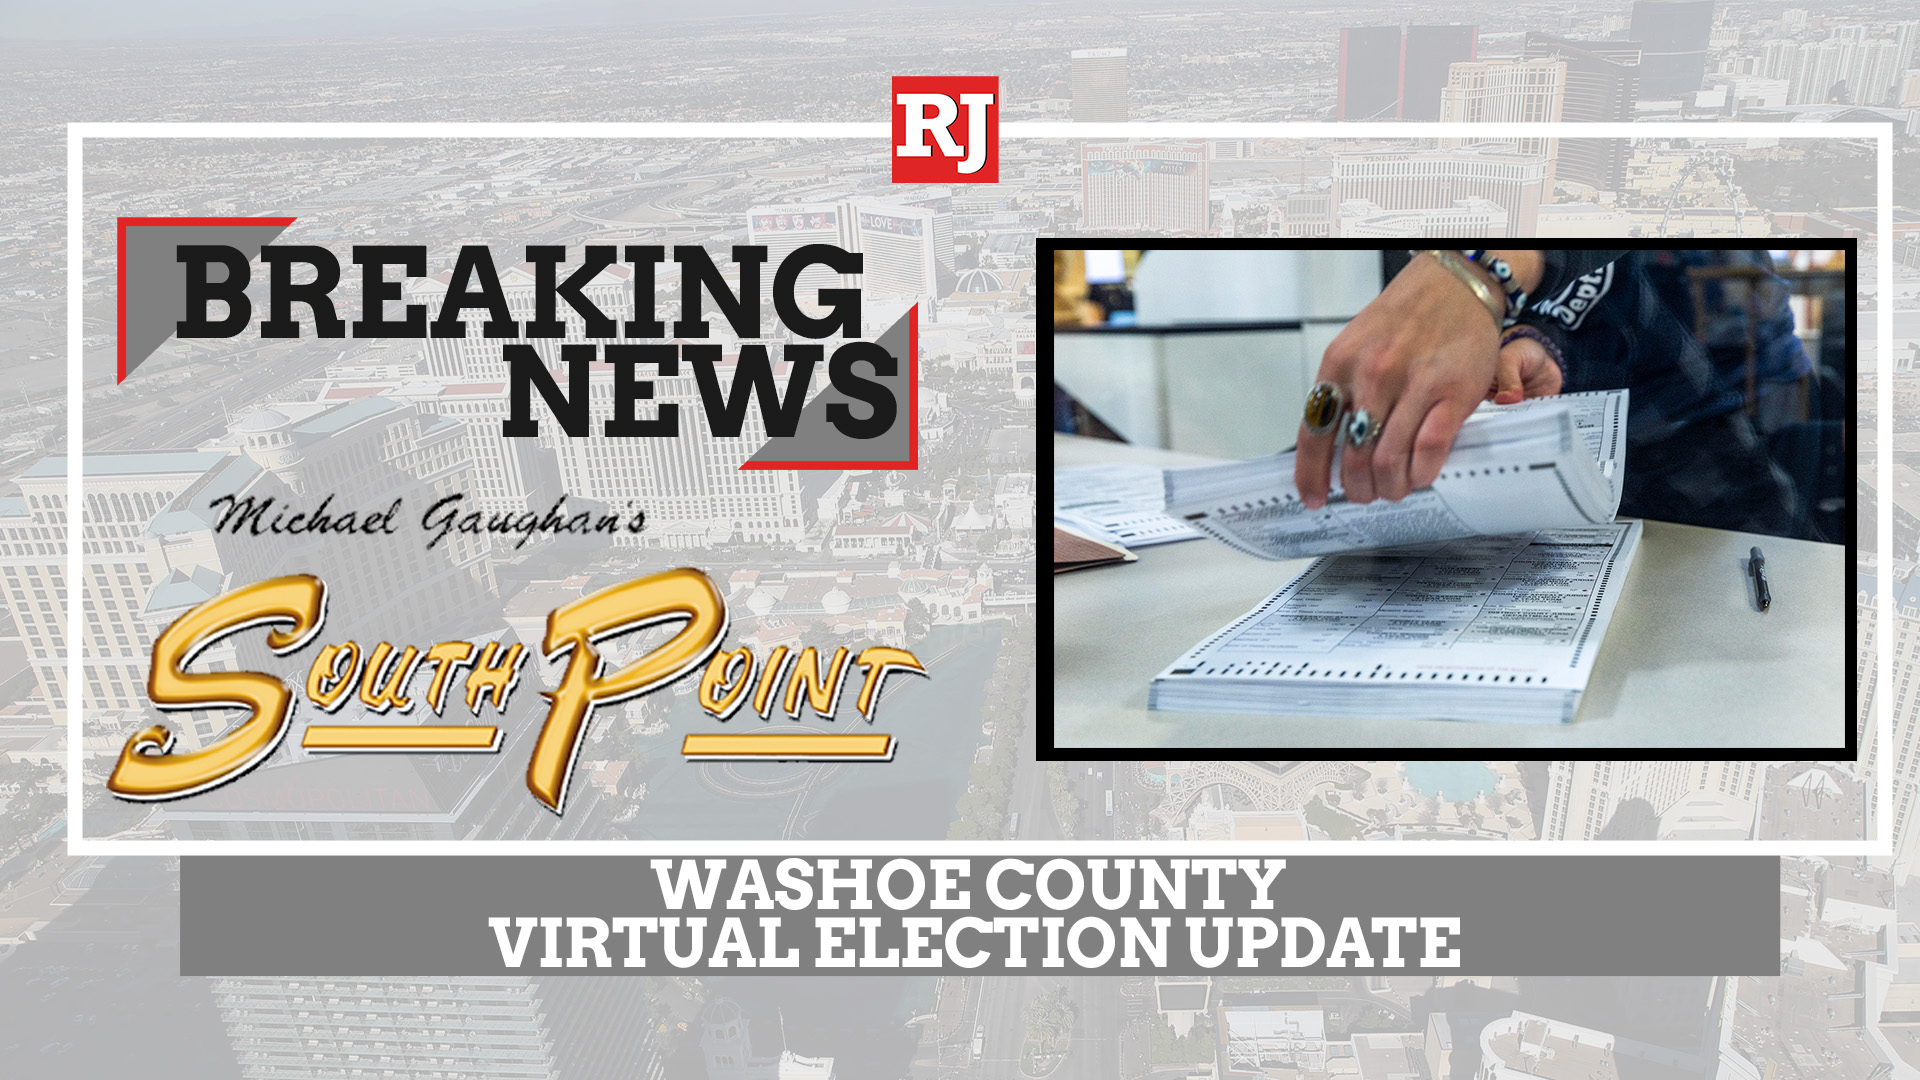 Election Update from Washoe County